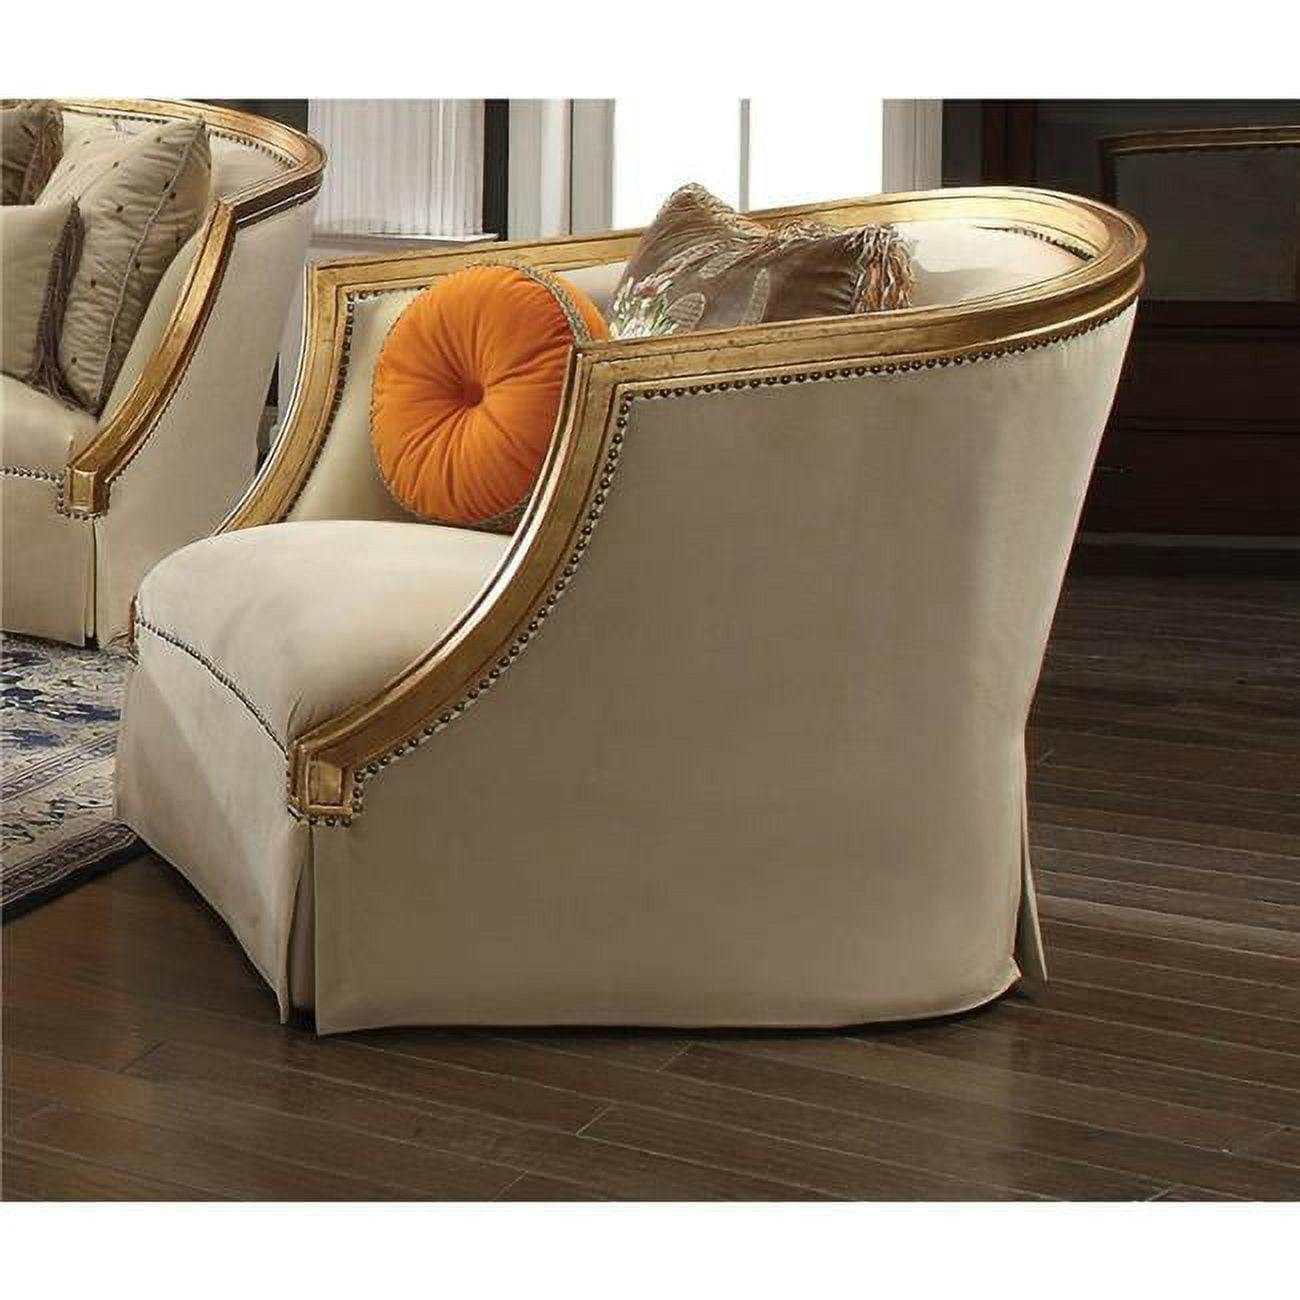 Elegant White Barrel Accent Chair with Wood Trim and Pillows